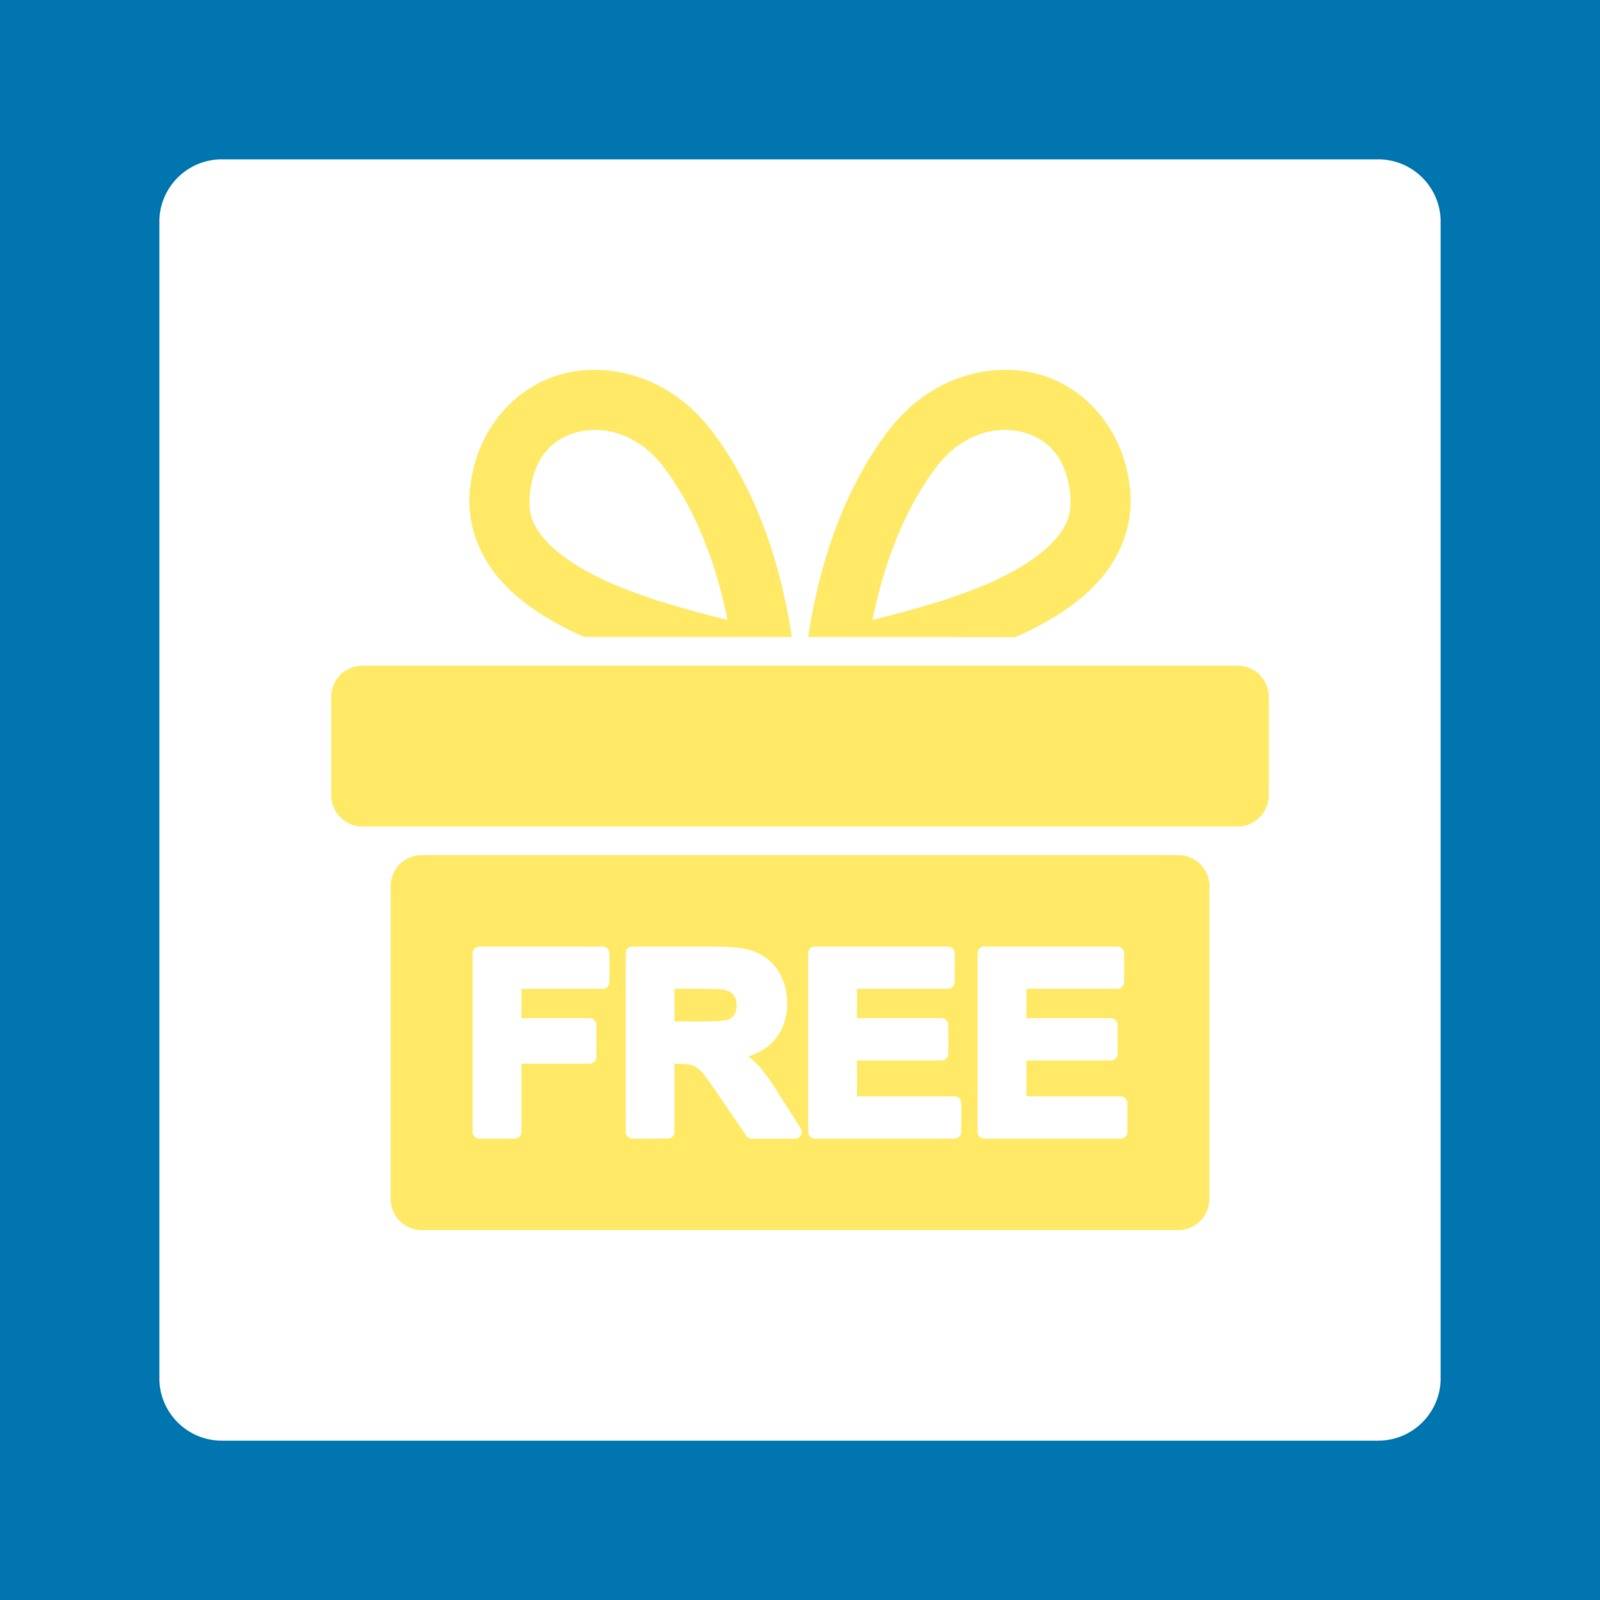 Gift icon. This flat rounded square button uses yellow and white colors and isolated on a blue background.